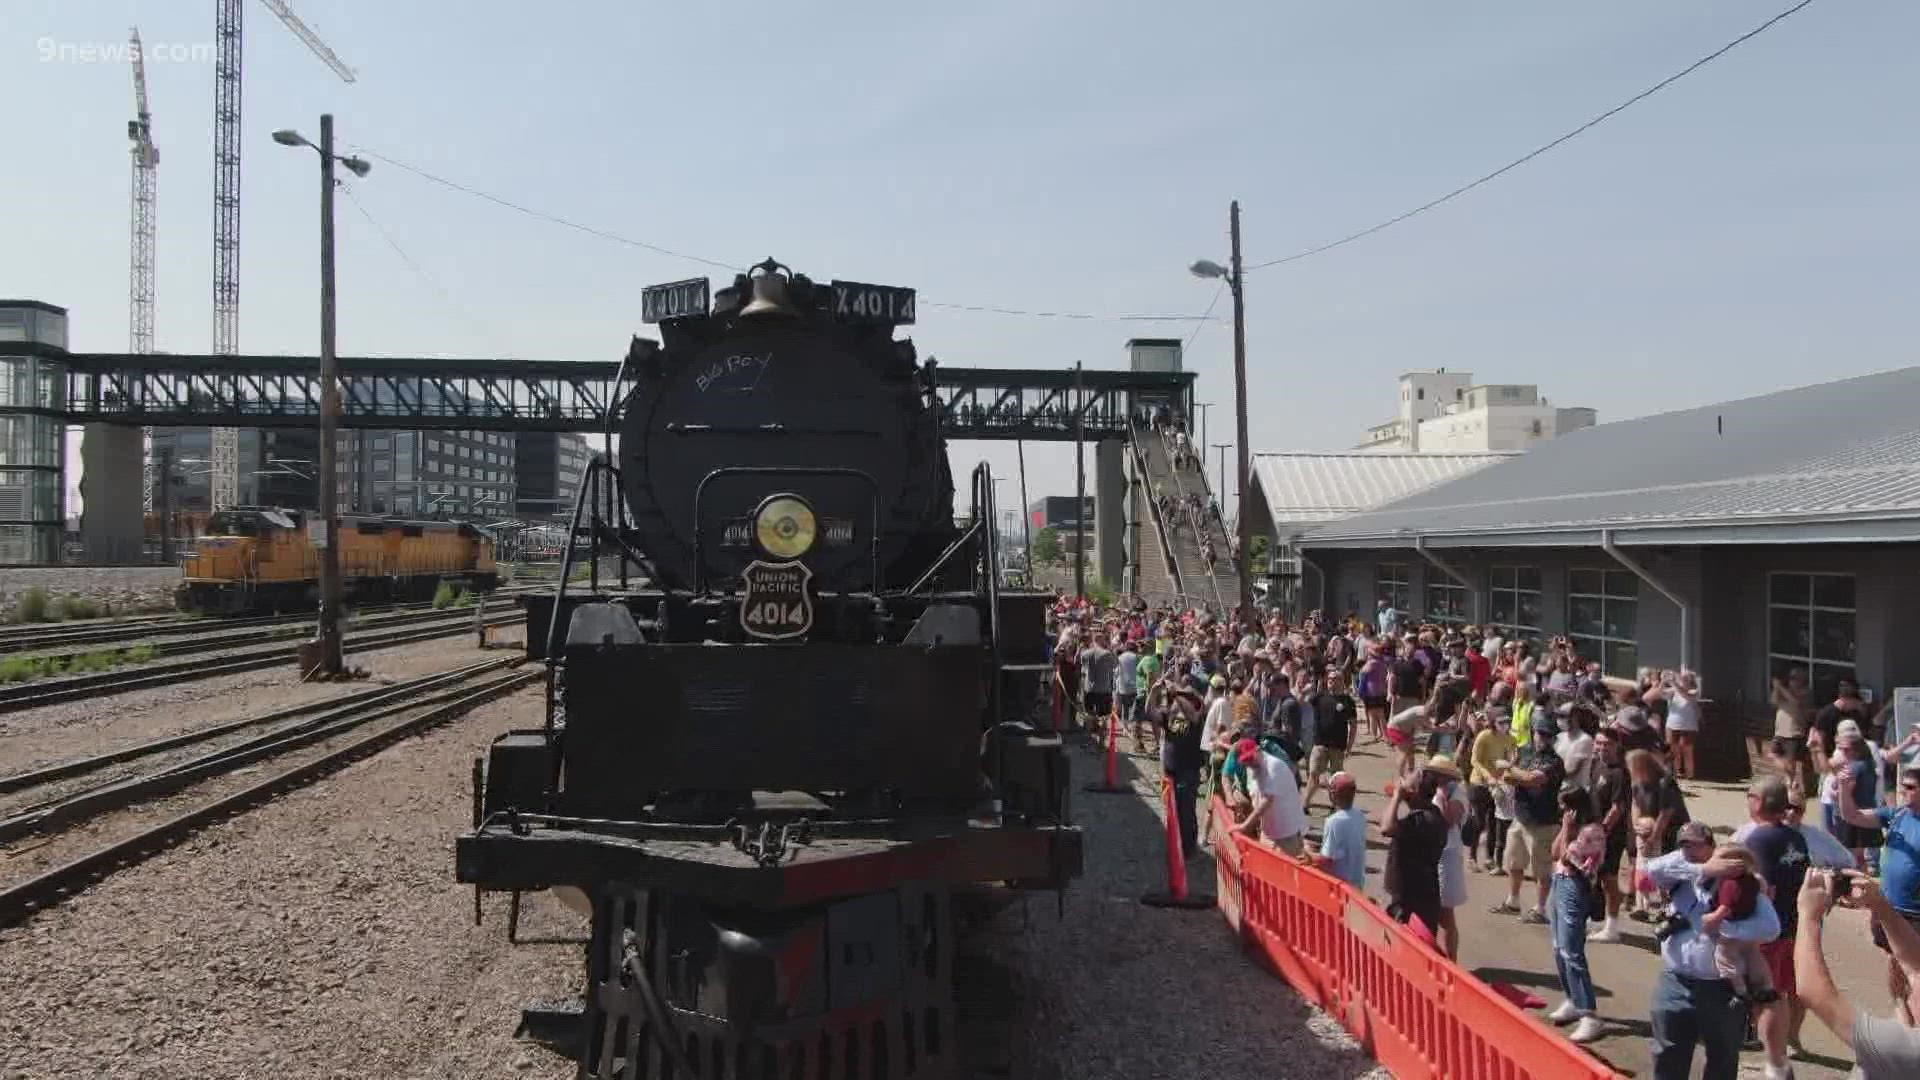 Big Boy No. 4014 made whistle-stops in several communities before arriving in Denver Sunday.